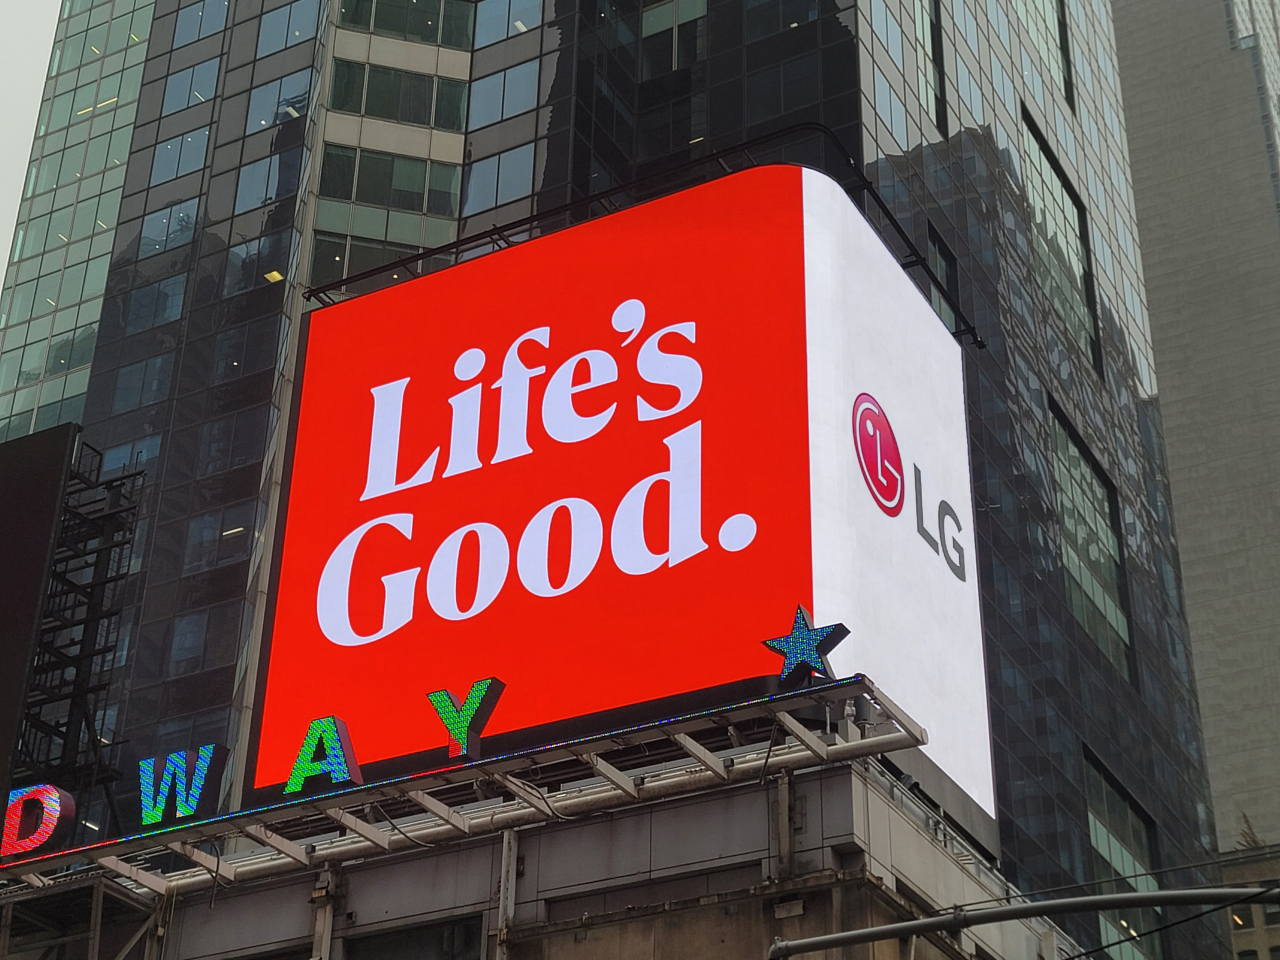 An LG Electronics advertisement flashes on a digital screen in Times Square in New York. (LG Electronics)